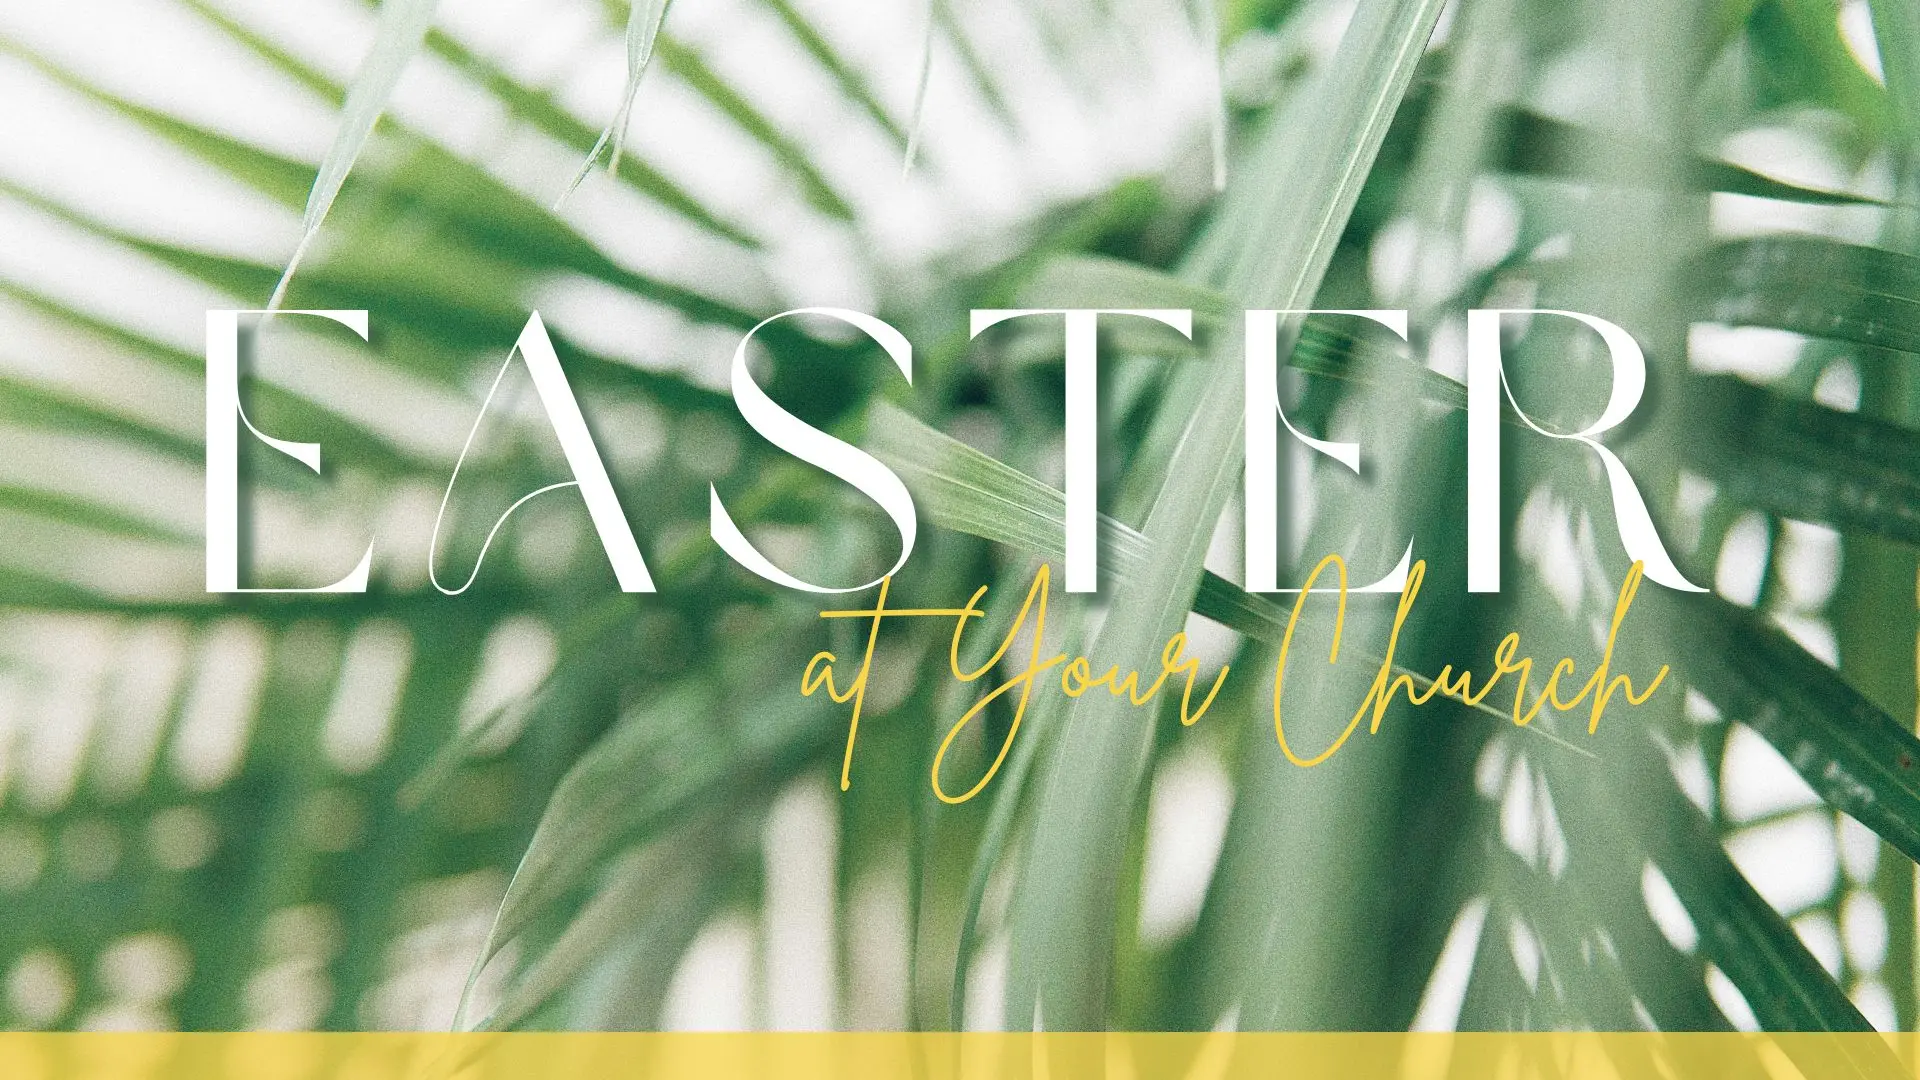 This Event Template For Easter Celebrates The Freshness And Renewal Of The Season With A Bright, Natural Background Of Green Palm Leaves. The Clean, Elegant Typeface Used For &Quot;Easter&Quot; Along With The Script For &Quot;At Your Church&Quot; Provides A Welcoming And Festive Invitation, Capturing The Spirit Of The Holiday.